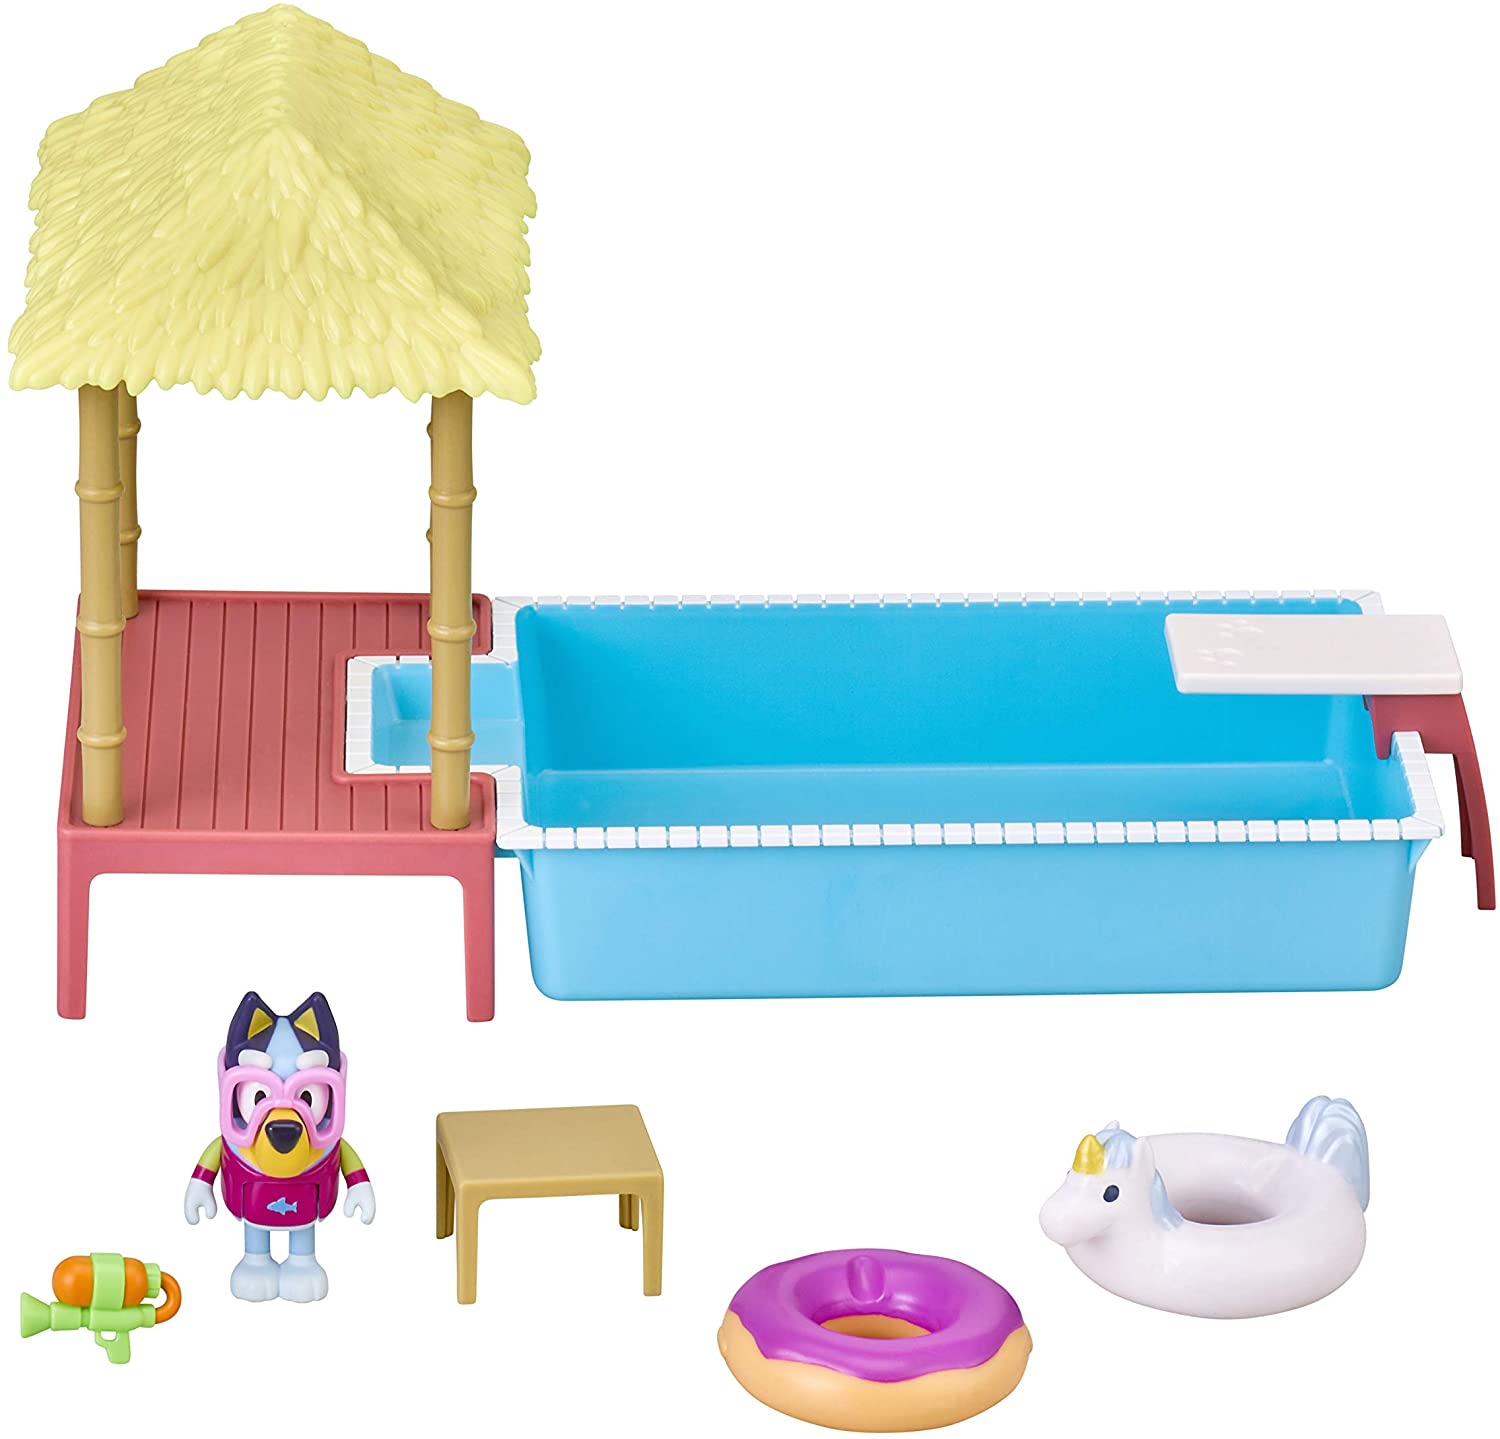 Bluey Pool Playset and Figure $8.50 + Free Shipping w/ Prime or on $25+